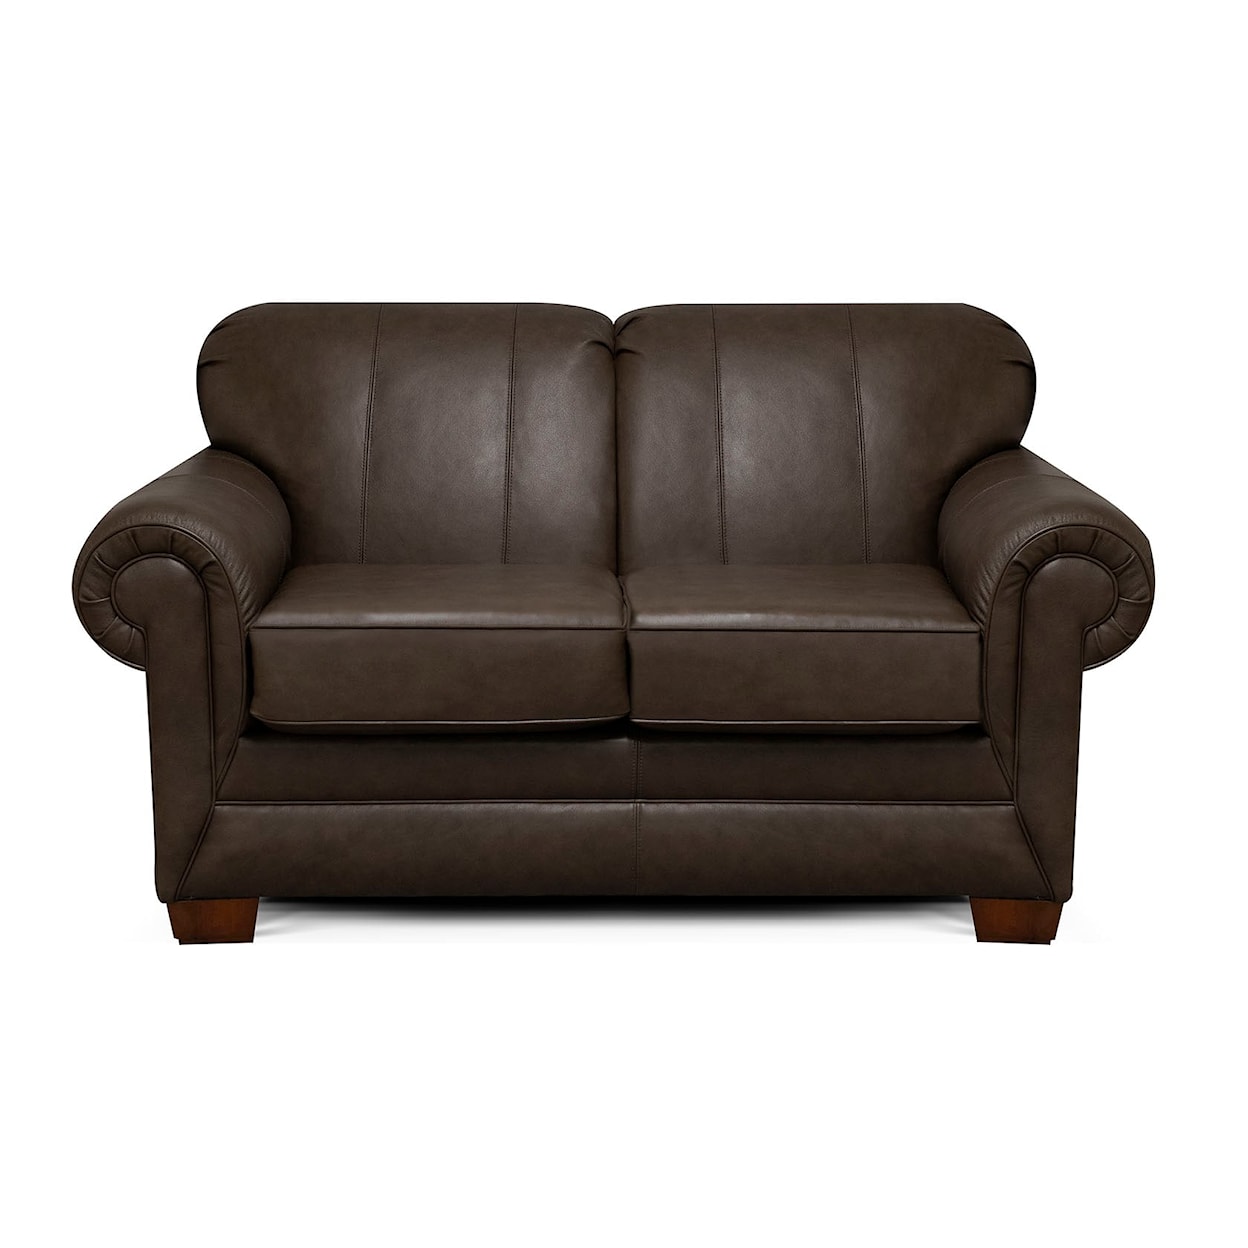 England 1430R/LSR Series Leather Loveseat